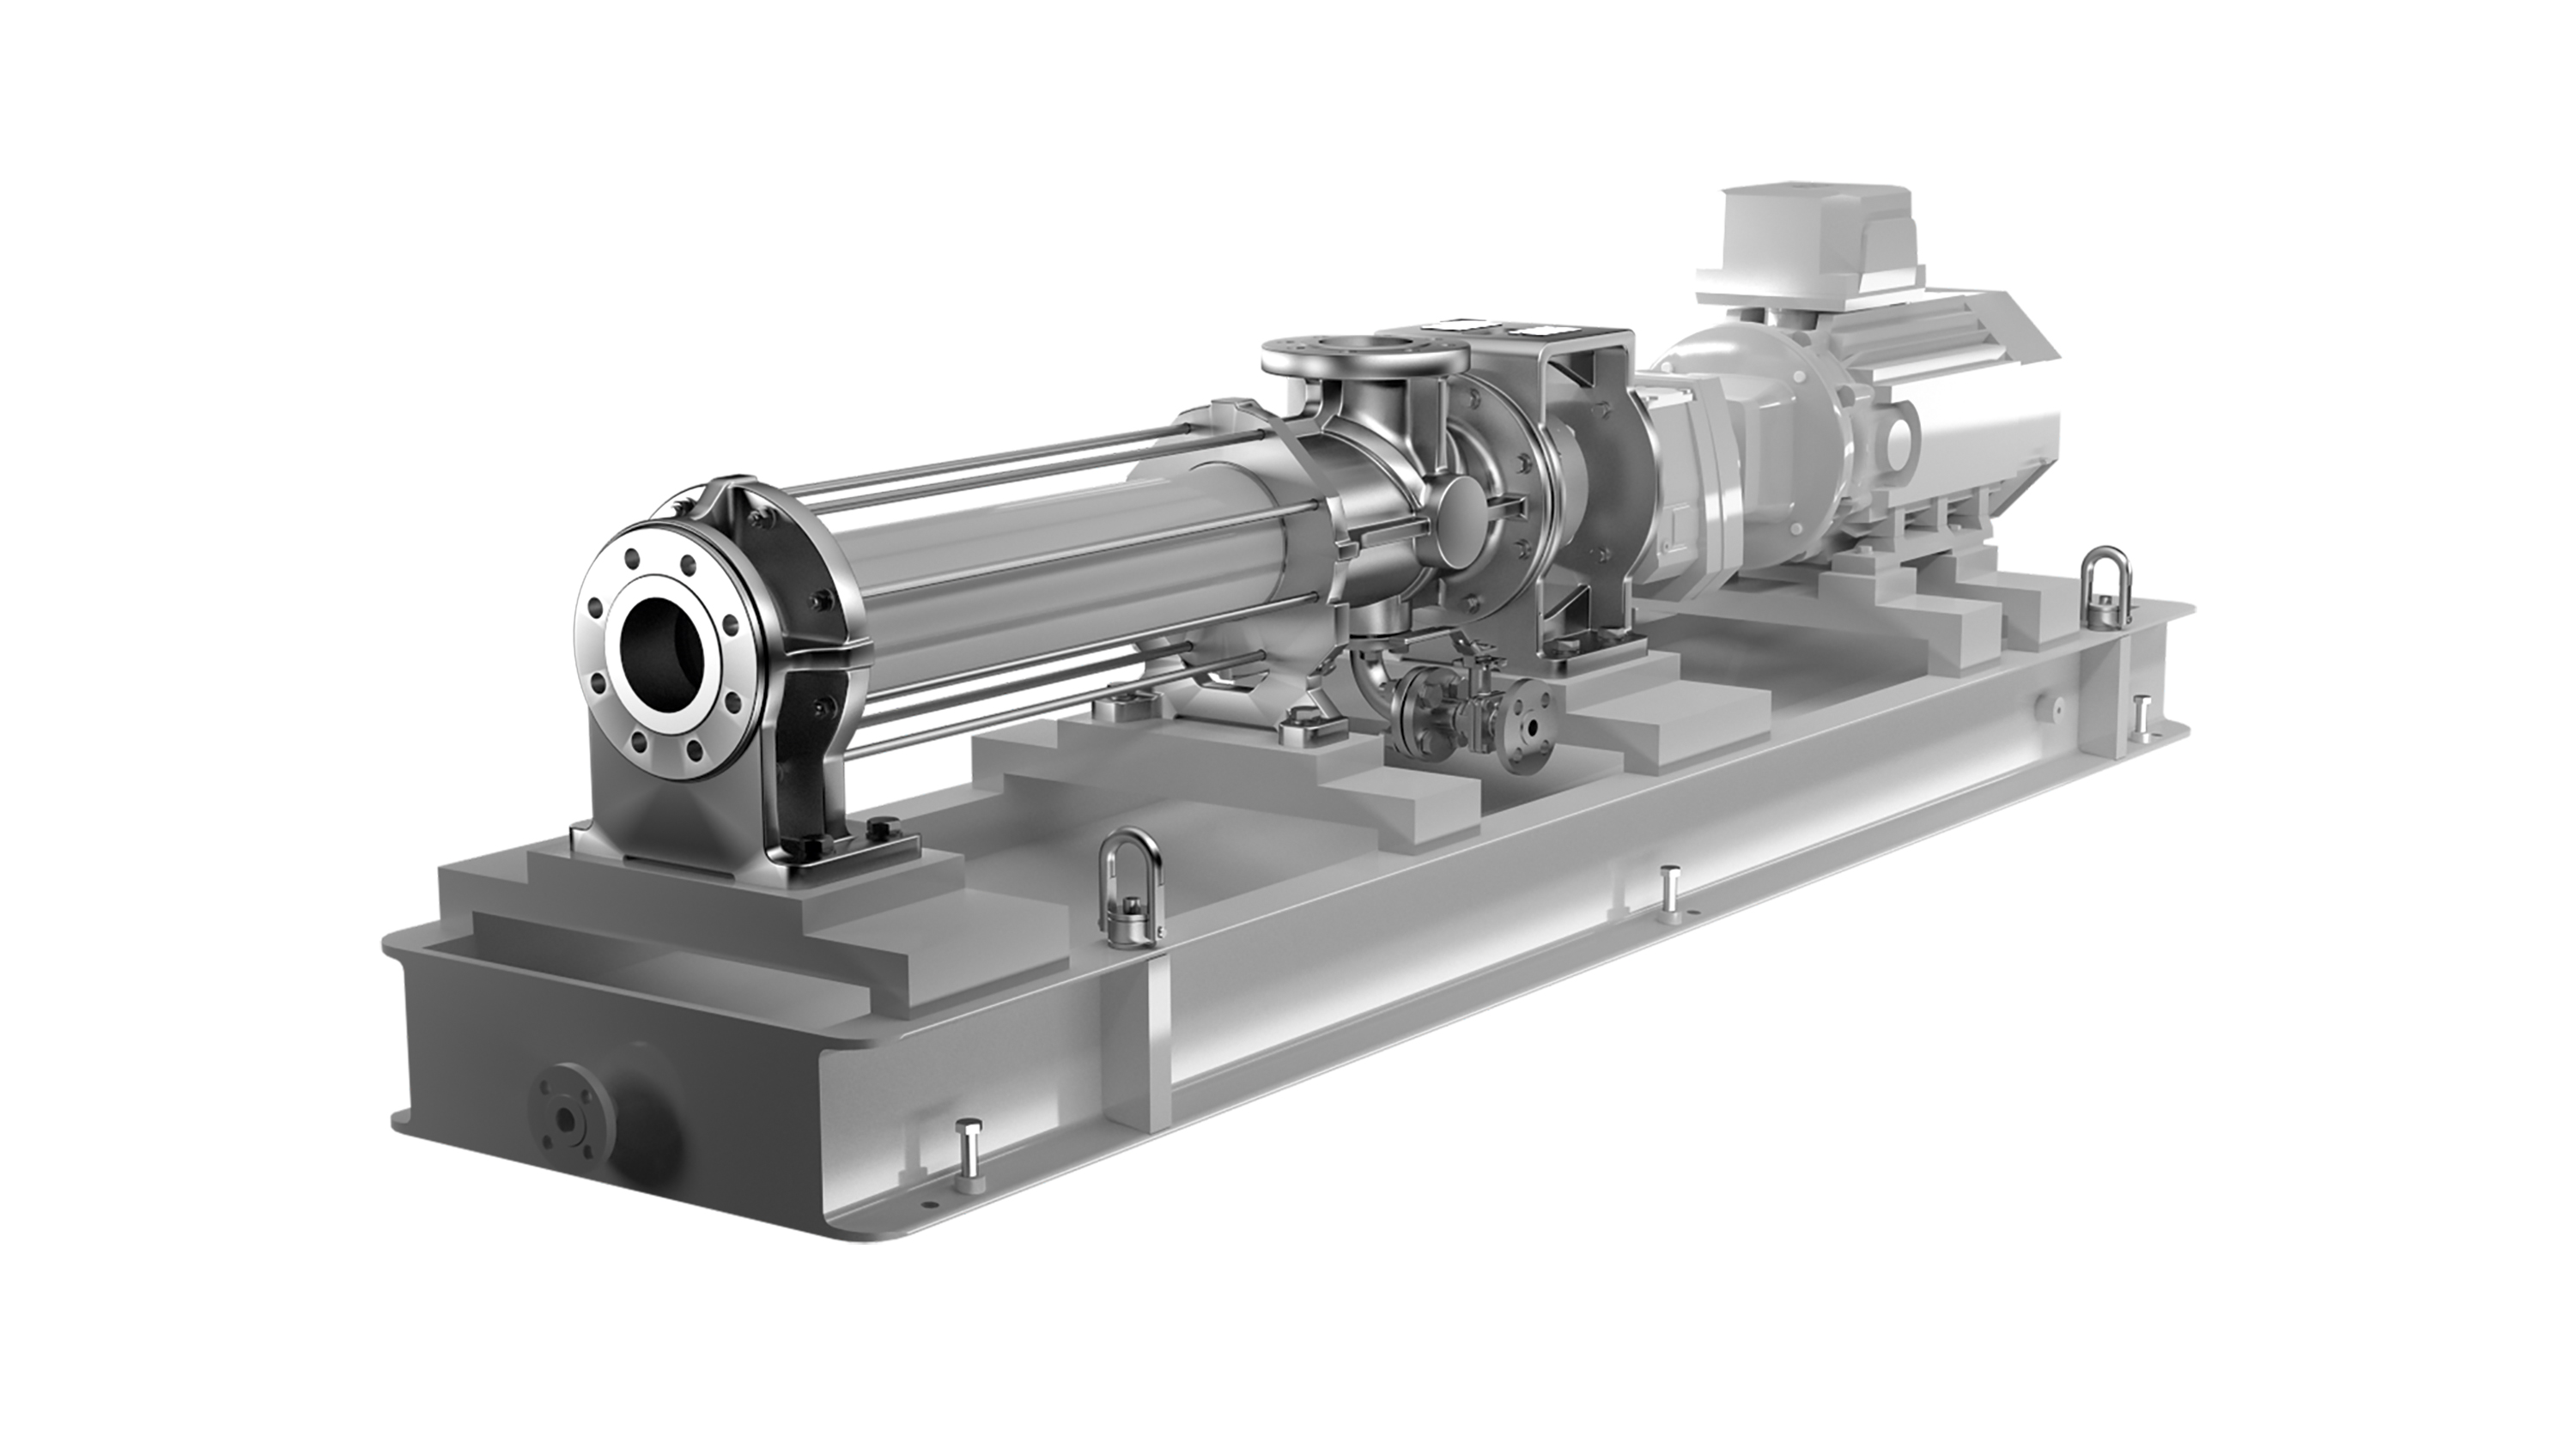 The new BNA standard progressive cavity pumps for the oil and gas industry  meet American Petroleum Institute (API) standards.